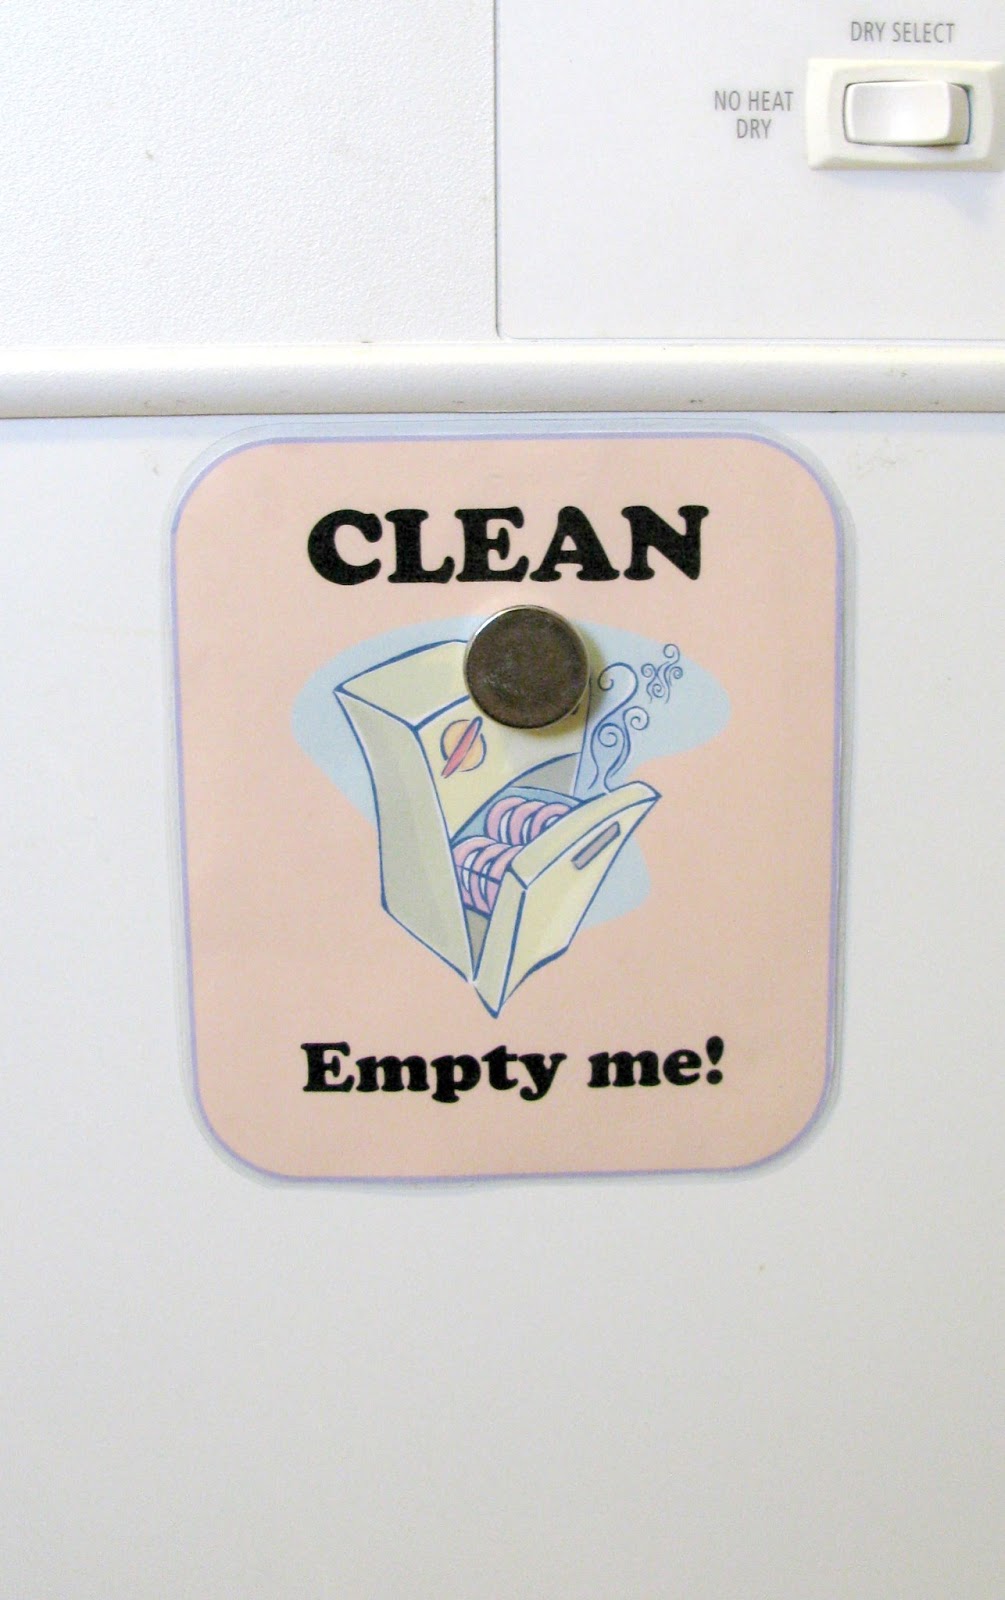 FREE Dishwasher Clean Dirty Sign Printable